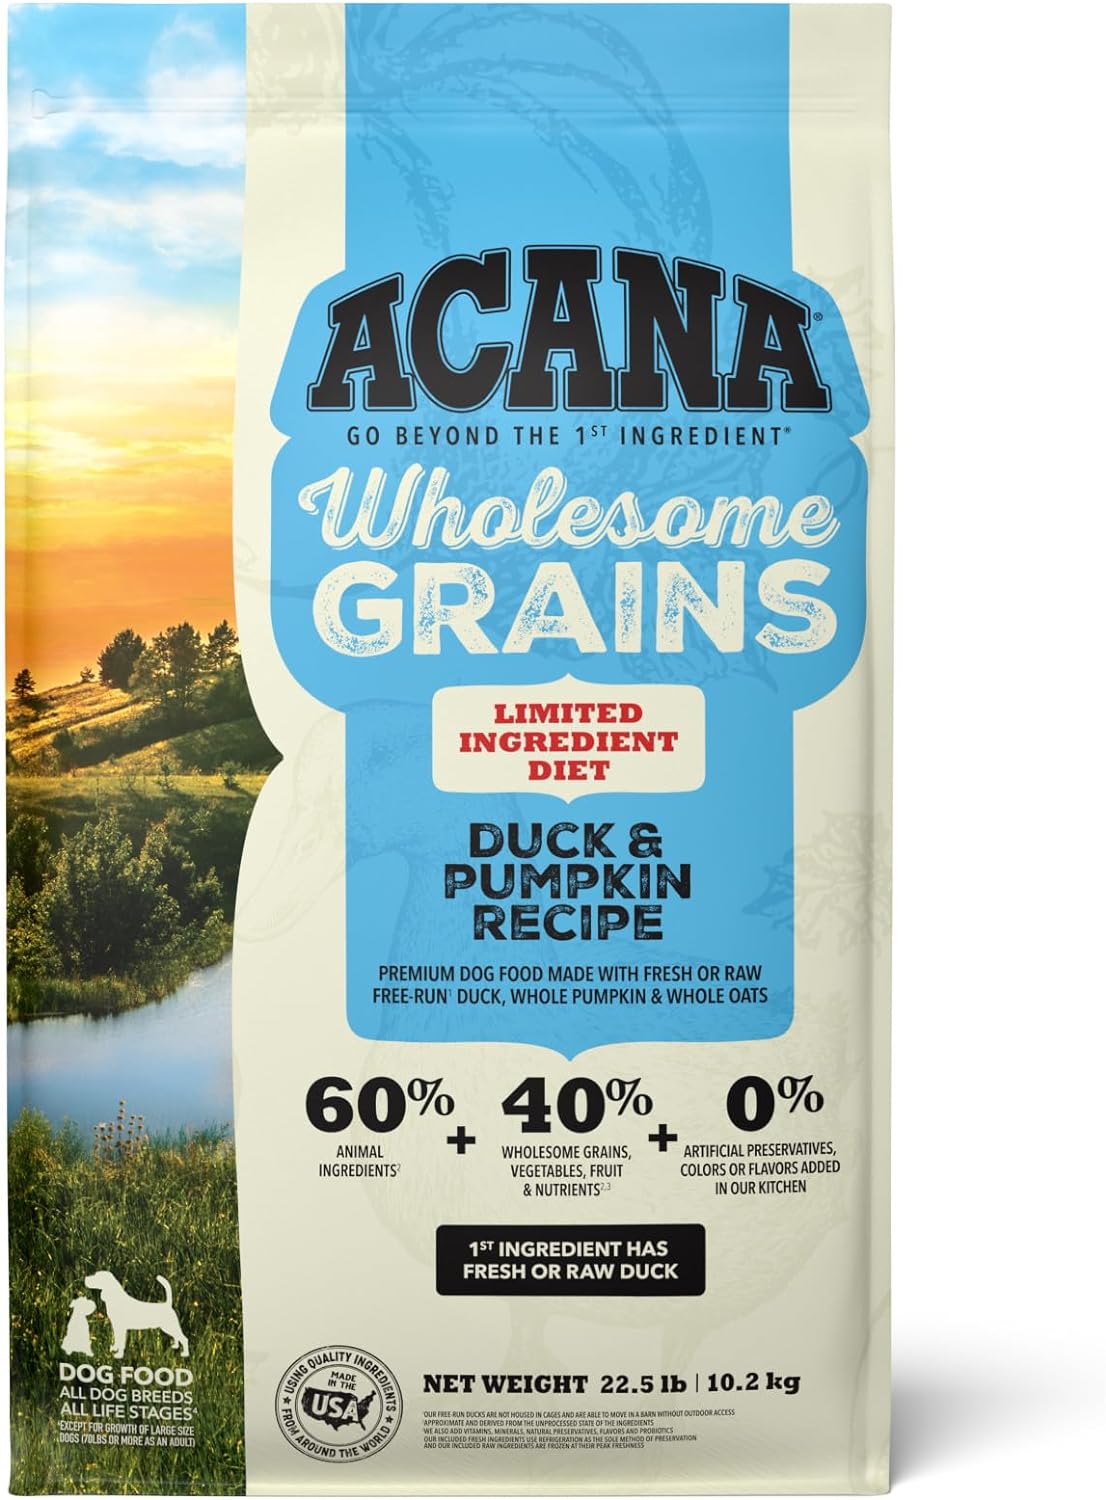 ACANA Wholesome Grains Limited Ingredient Diet Dry Dog Food, Duck & Pumpkin Recipe, Single Protein Duck Dog Food, 22.5lb